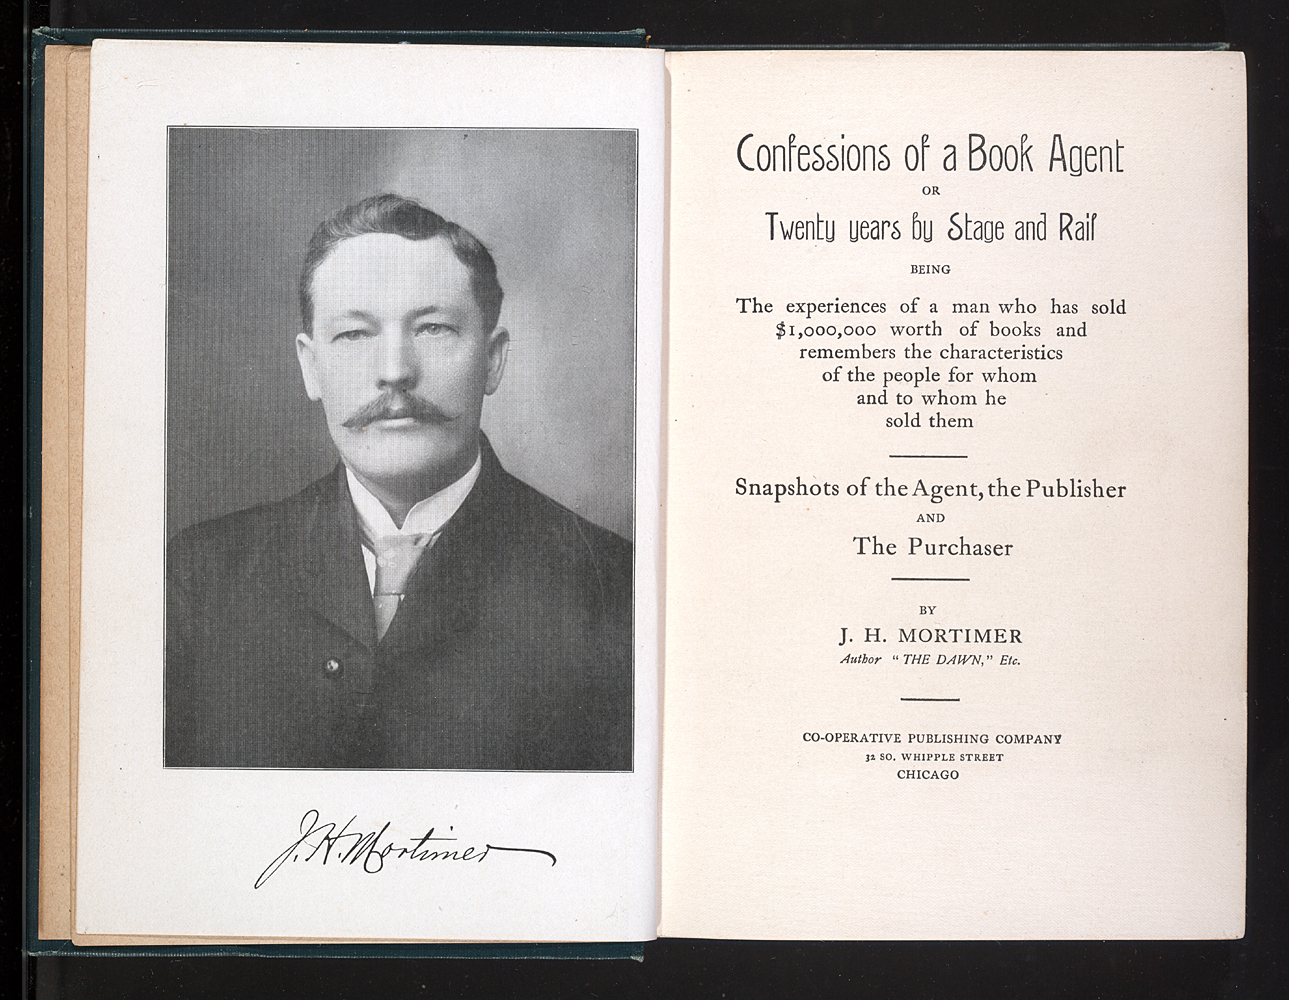 Photo of James Howard Mortimer in the interior cover of Confessions of a Book Agent